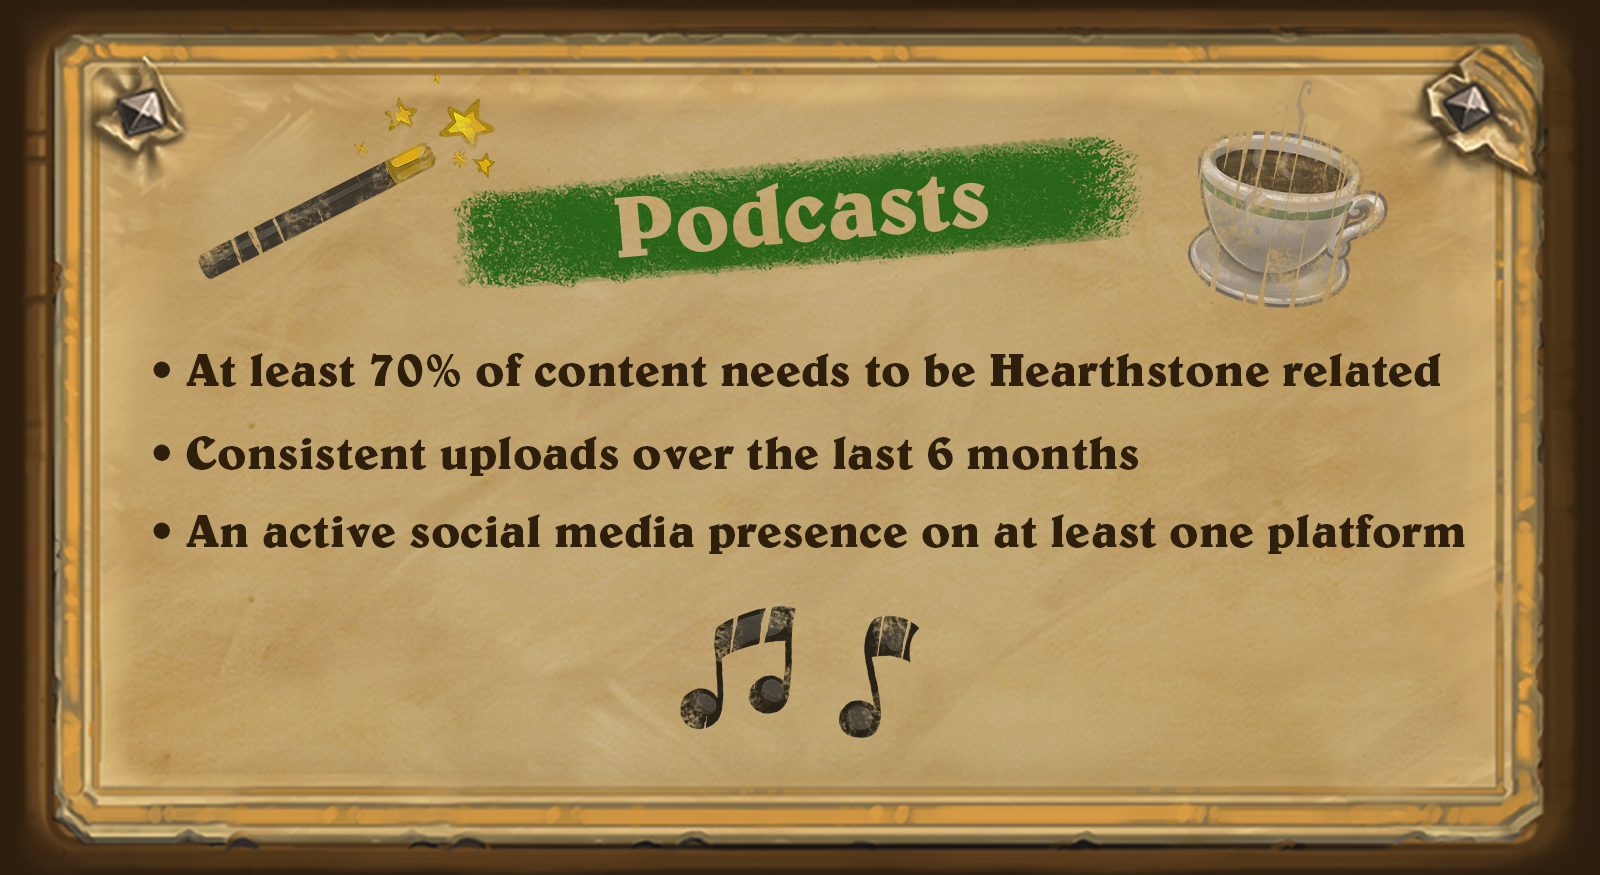 At 70% of content needs to be Hearthstone related. Consistent uploads over the last 6 months. An active social media presence on at least one platform.